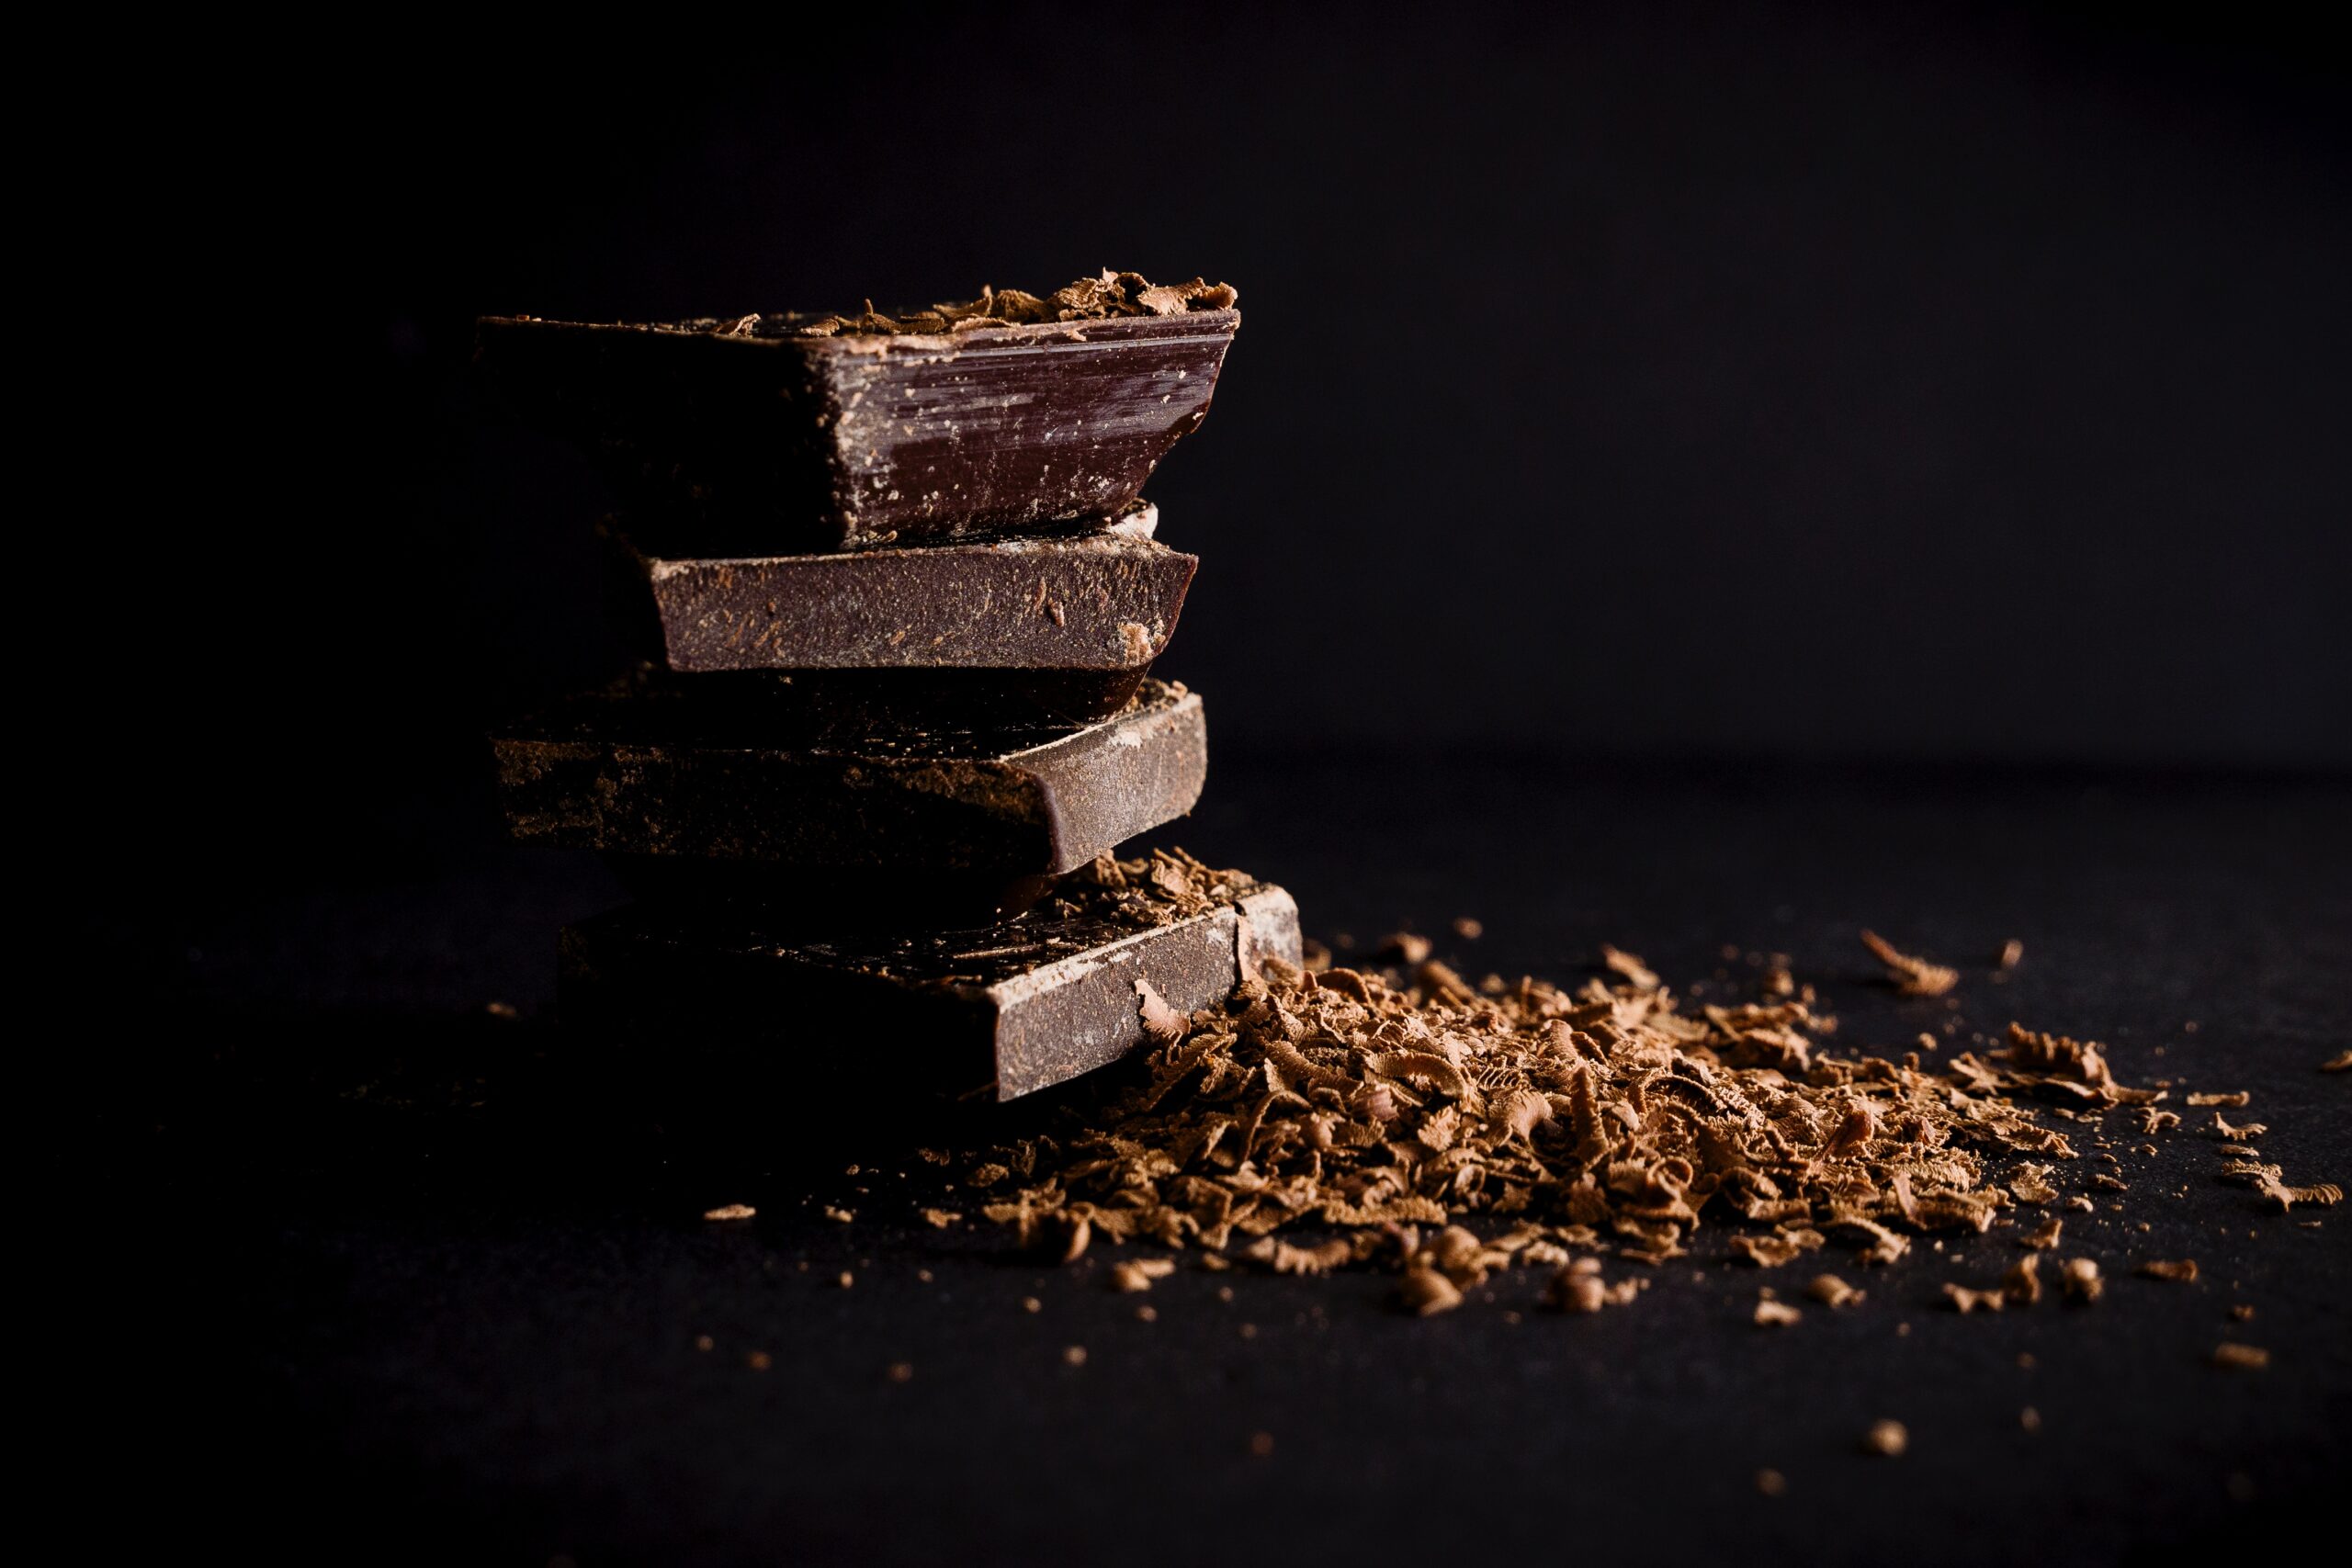 Chocolate is not a super food